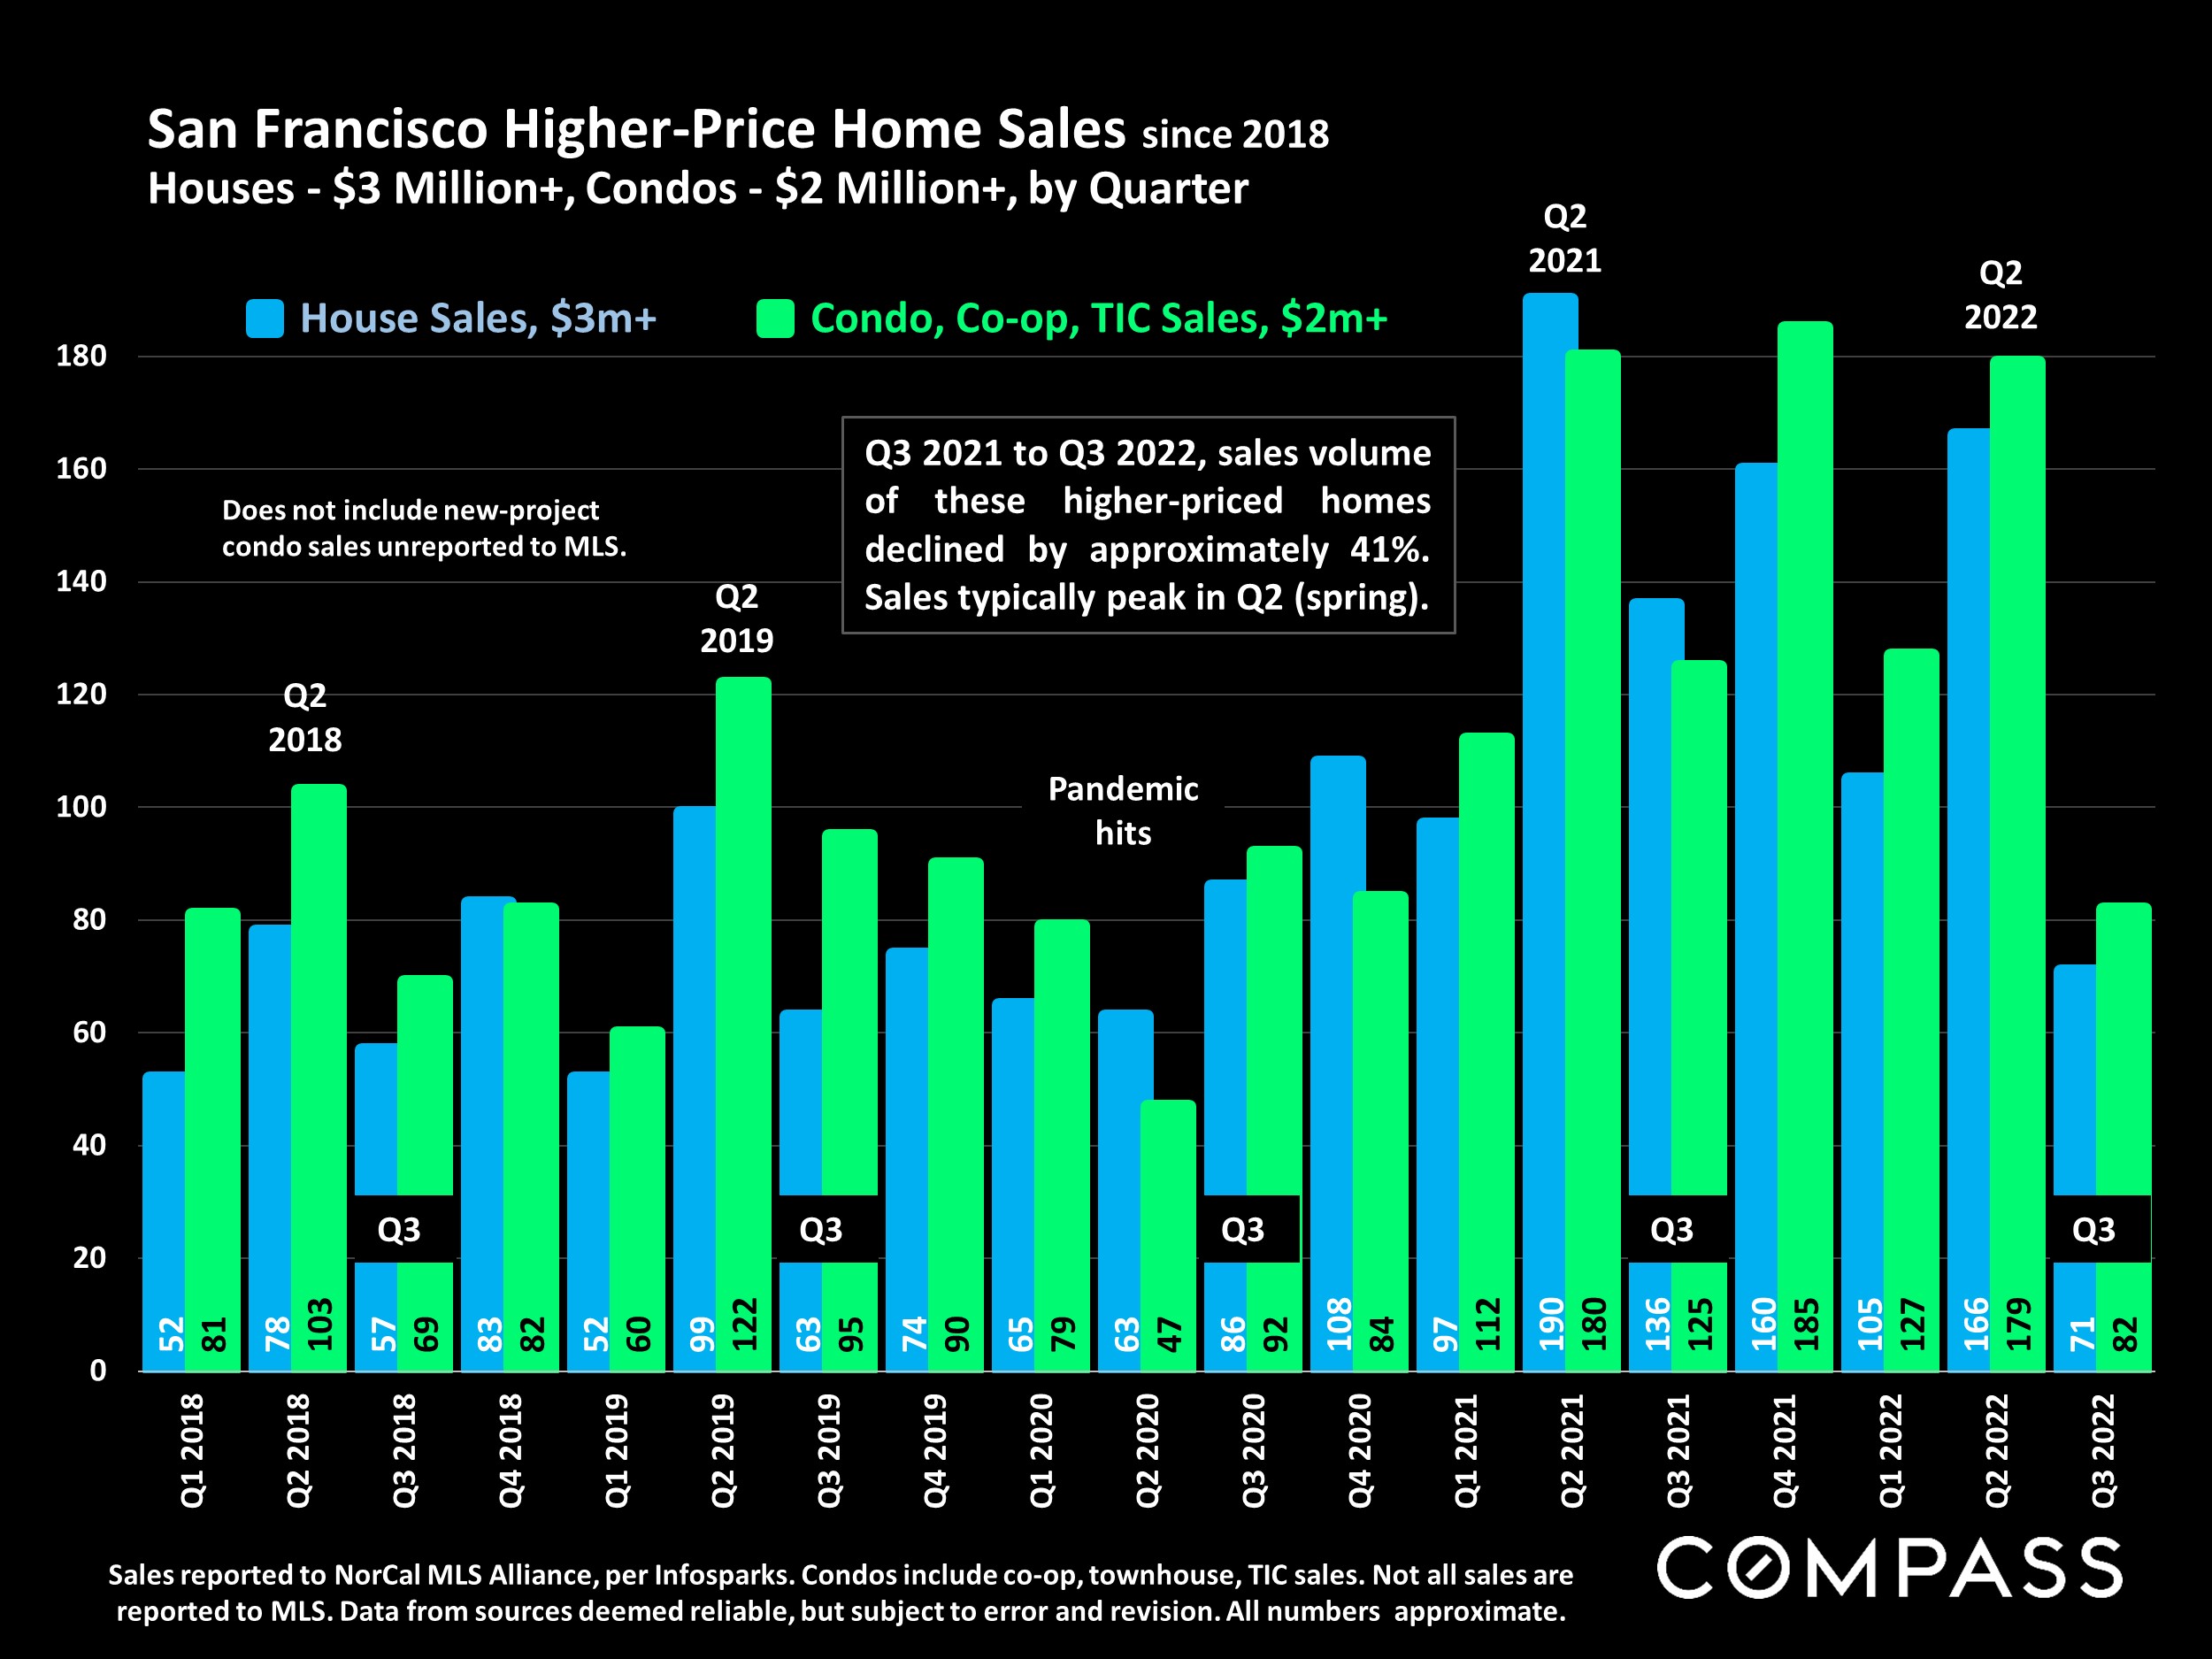 San Francisco Higher-Price Home Sales since 2018